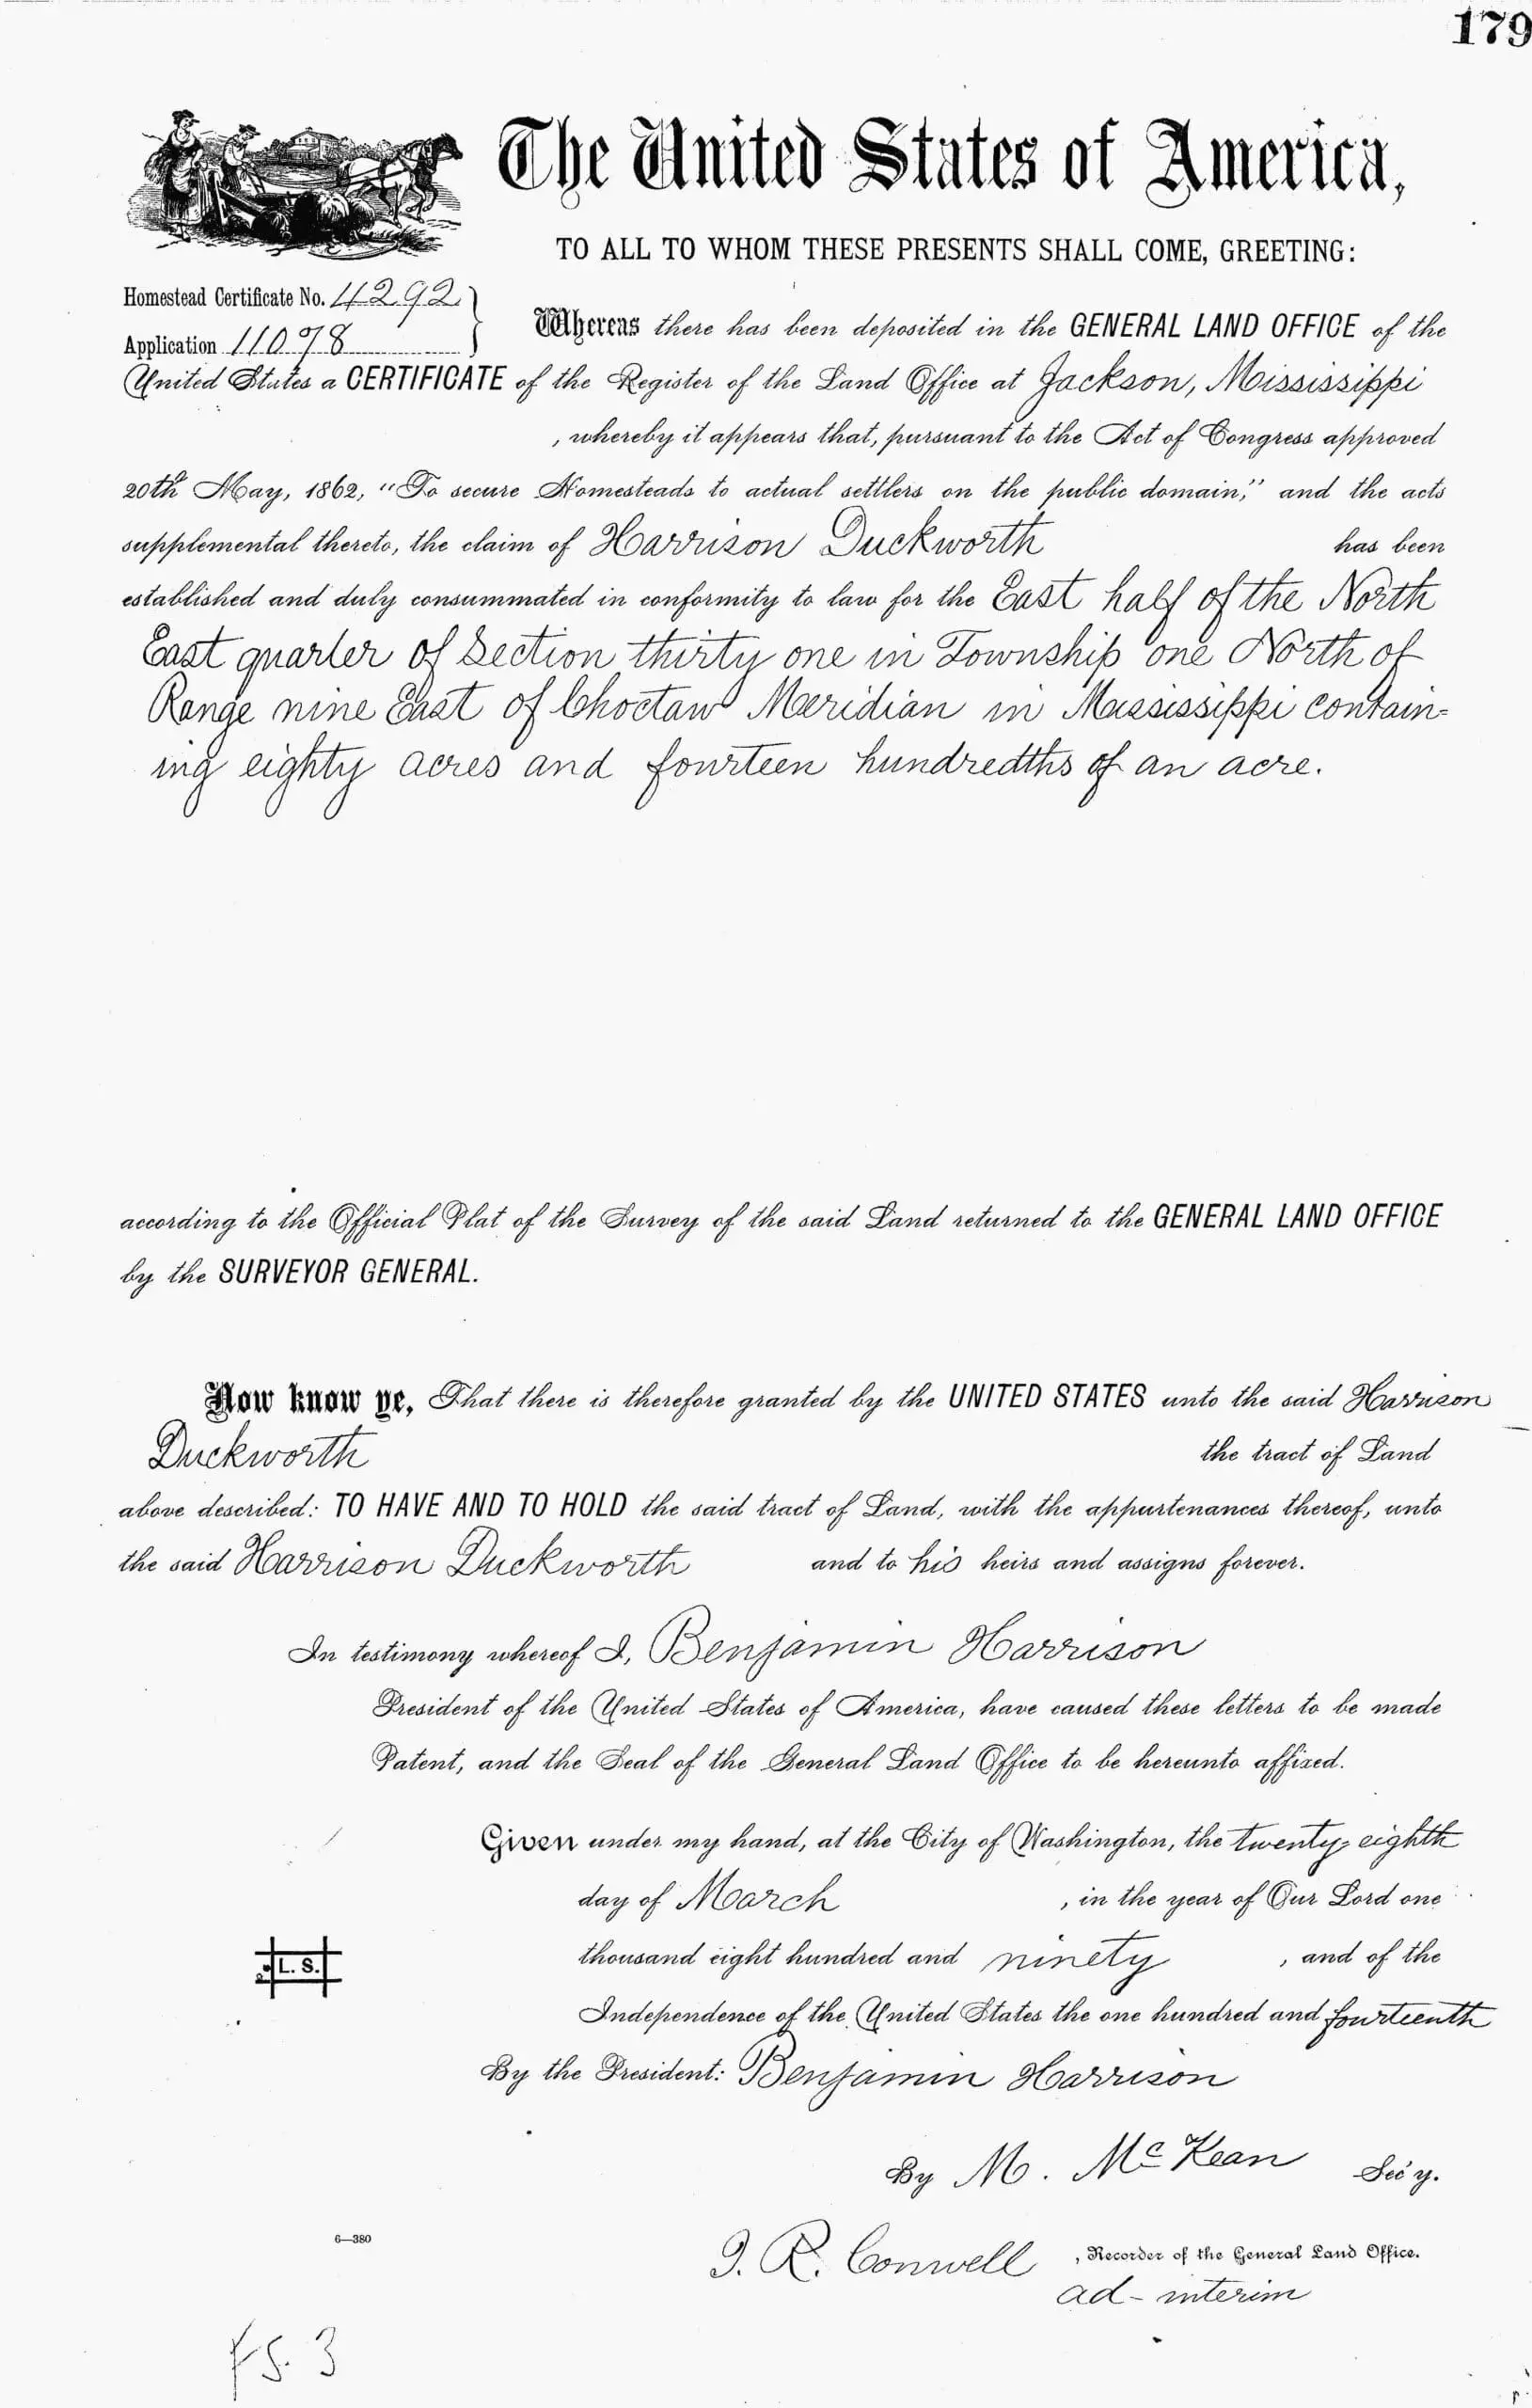 1890 Land acquisition contract used in my article the Life Story of Harrison Duckworth, My Great Great Grandfather.